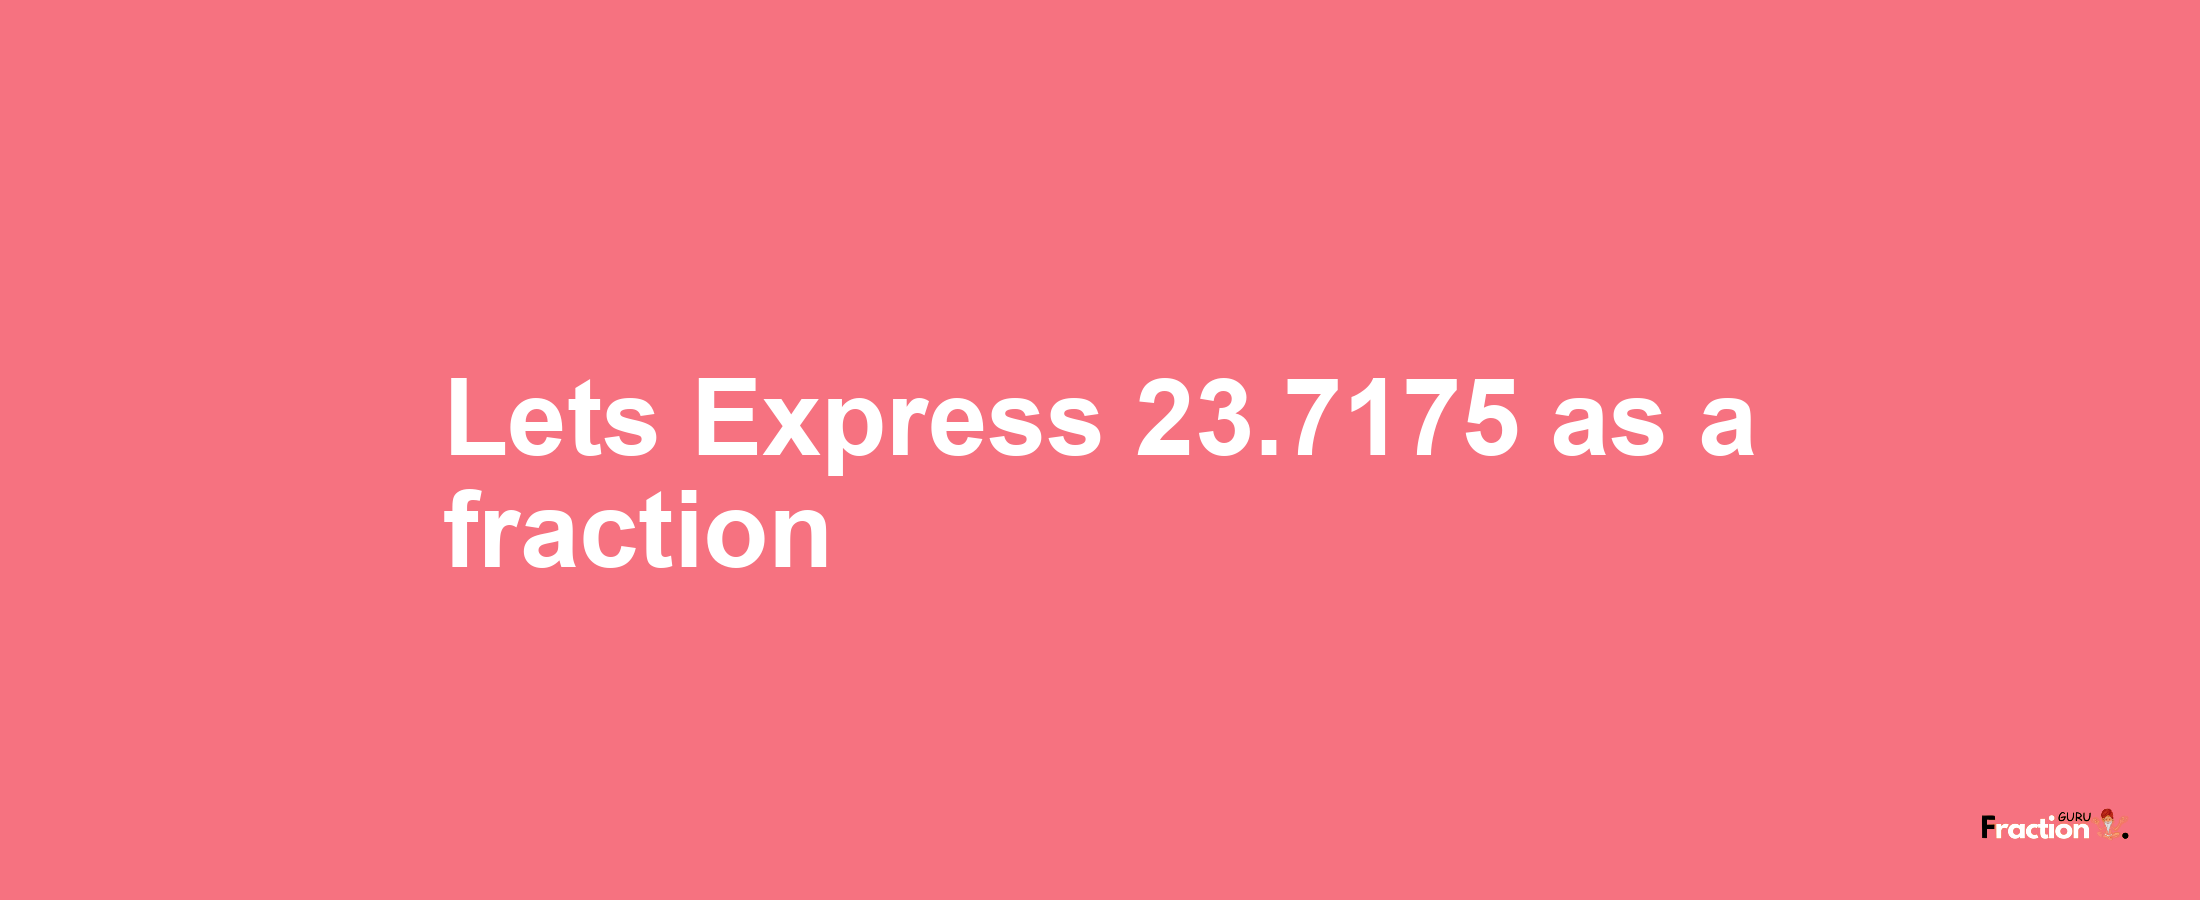 Lets Express 23.7175 as afraction